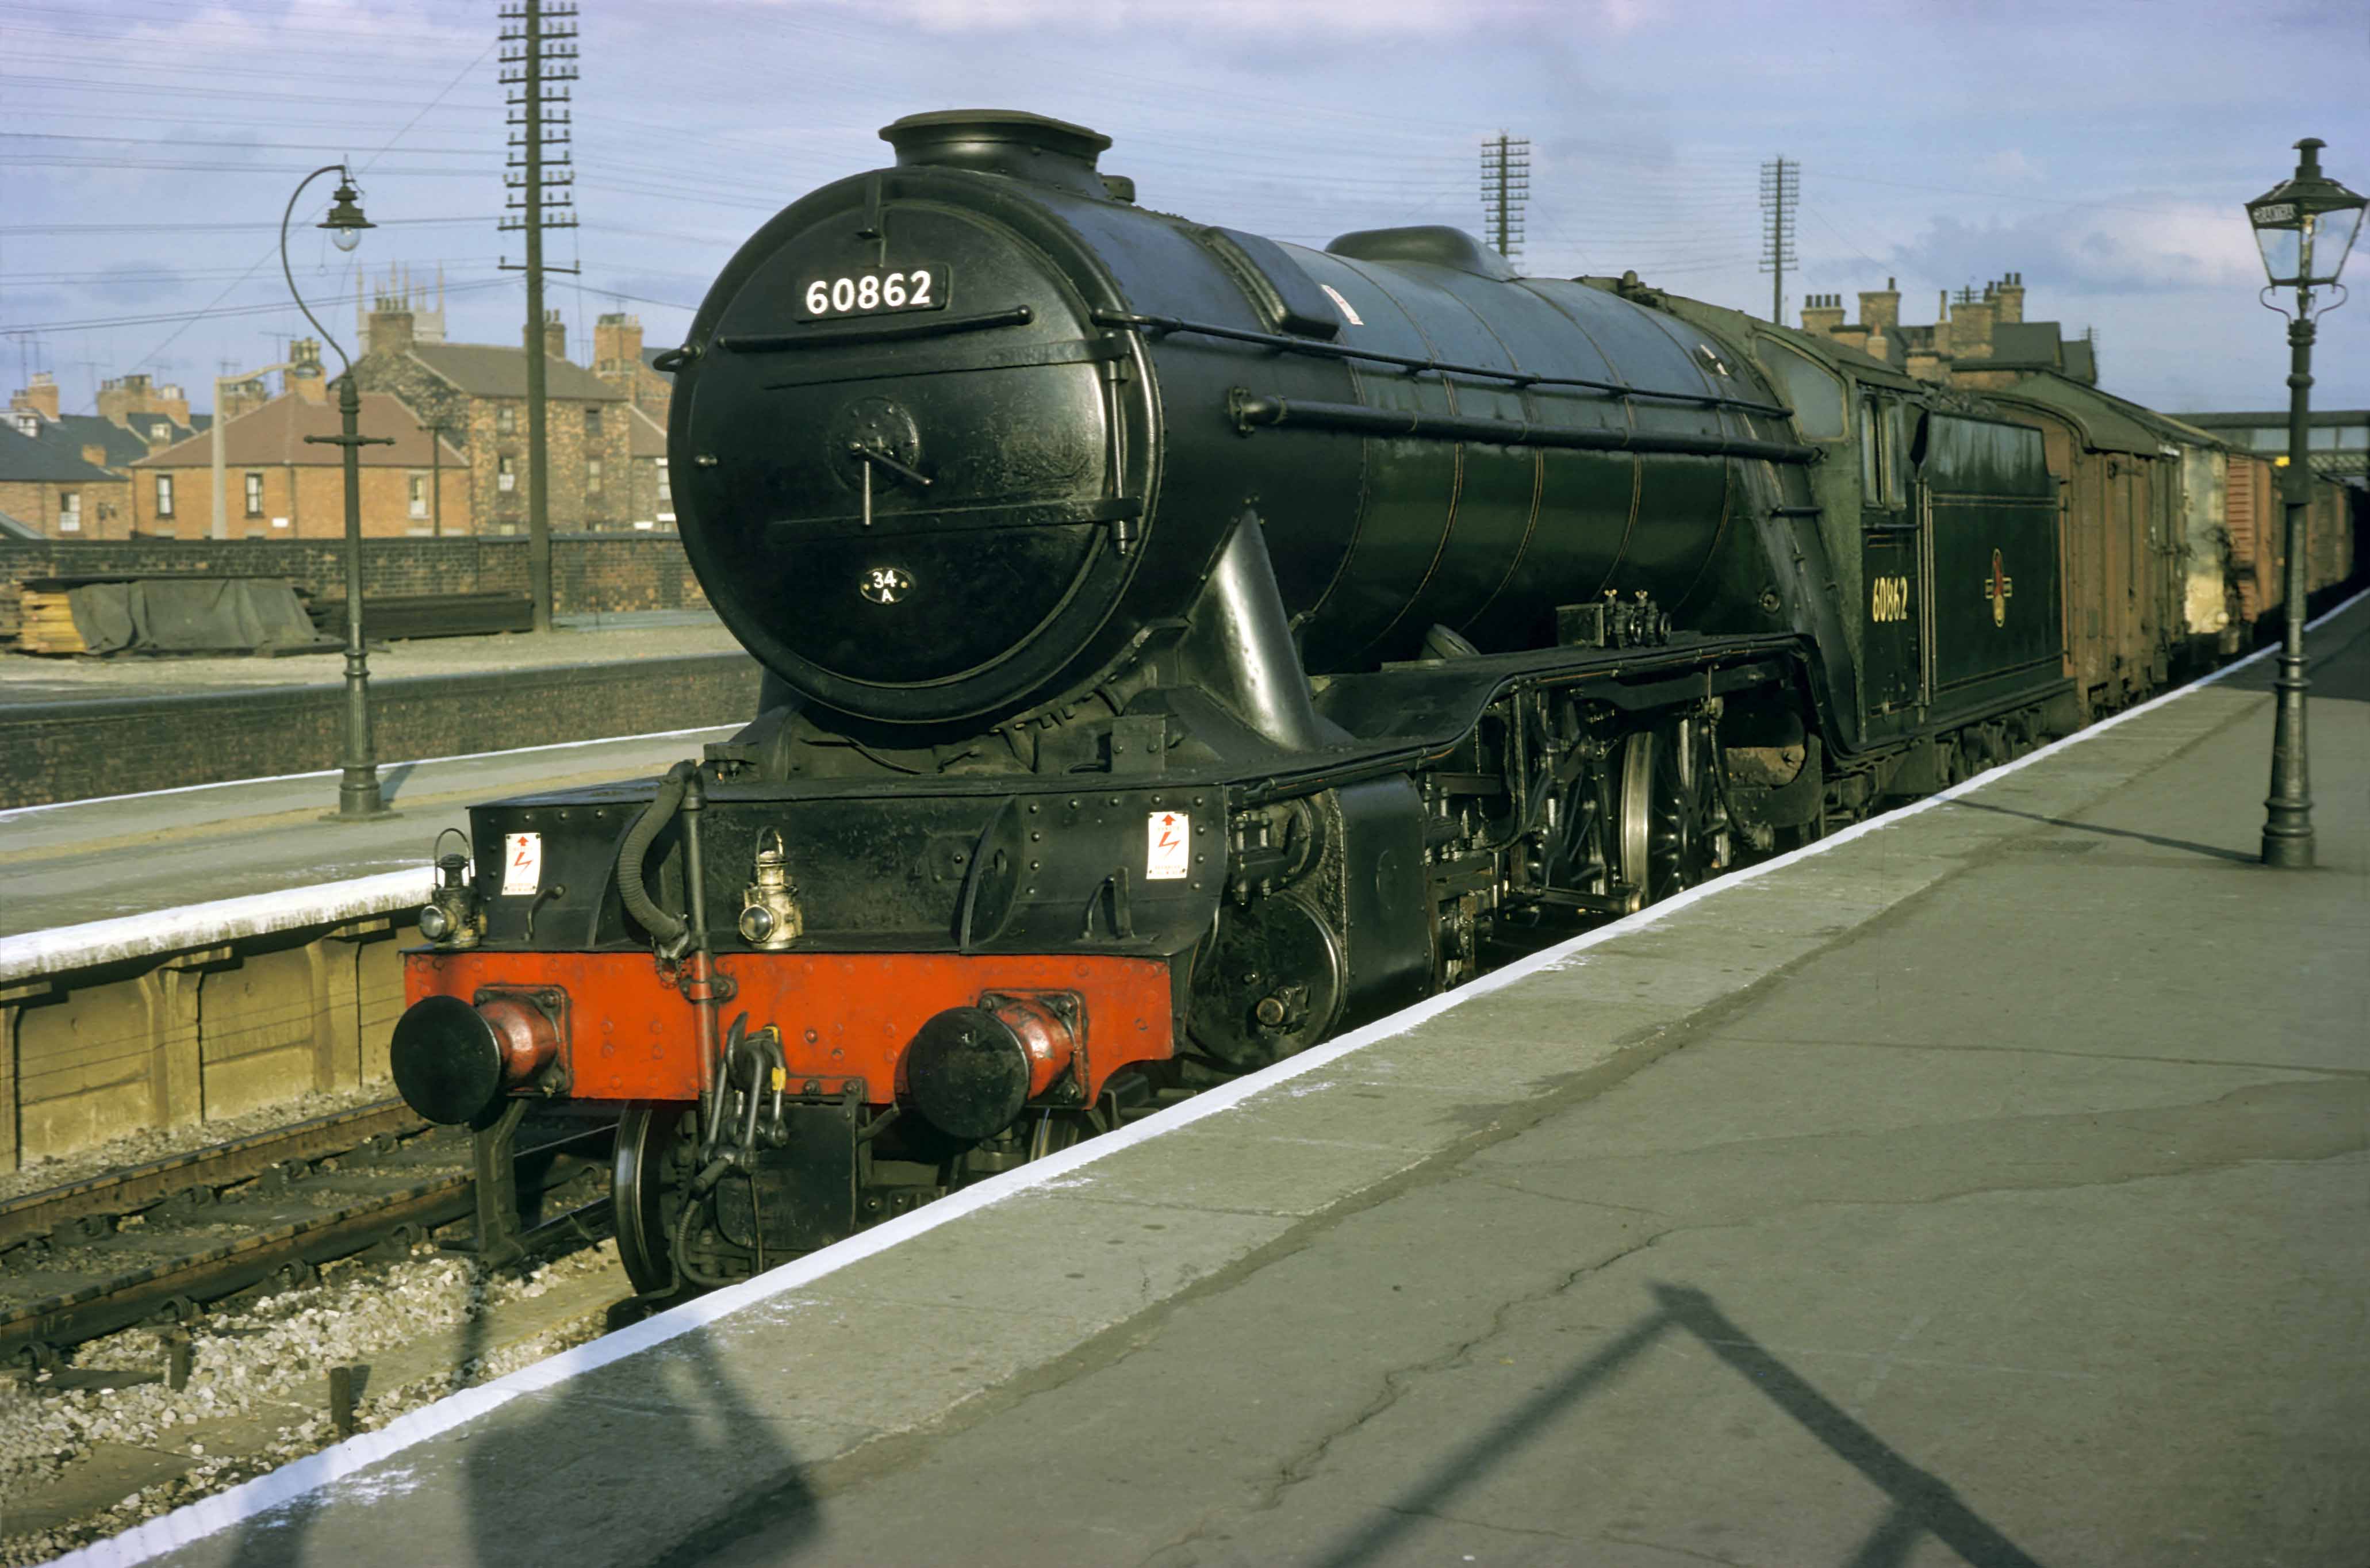 A northbound express freight on 21st or 28th June 1962, hauled by class V2 locomotive No. 60862 of King’s Cross (34A) motive power depot. This is thought to be a service which left King's Cross Goods Depot at about 3.40pm. The King's Cross engine and men worked the train to York, where they lodged overnight and returned the following day on an Inverkeithing to King's Cross express freight. Photograph by Cedric A. Clayson, © John Clayson